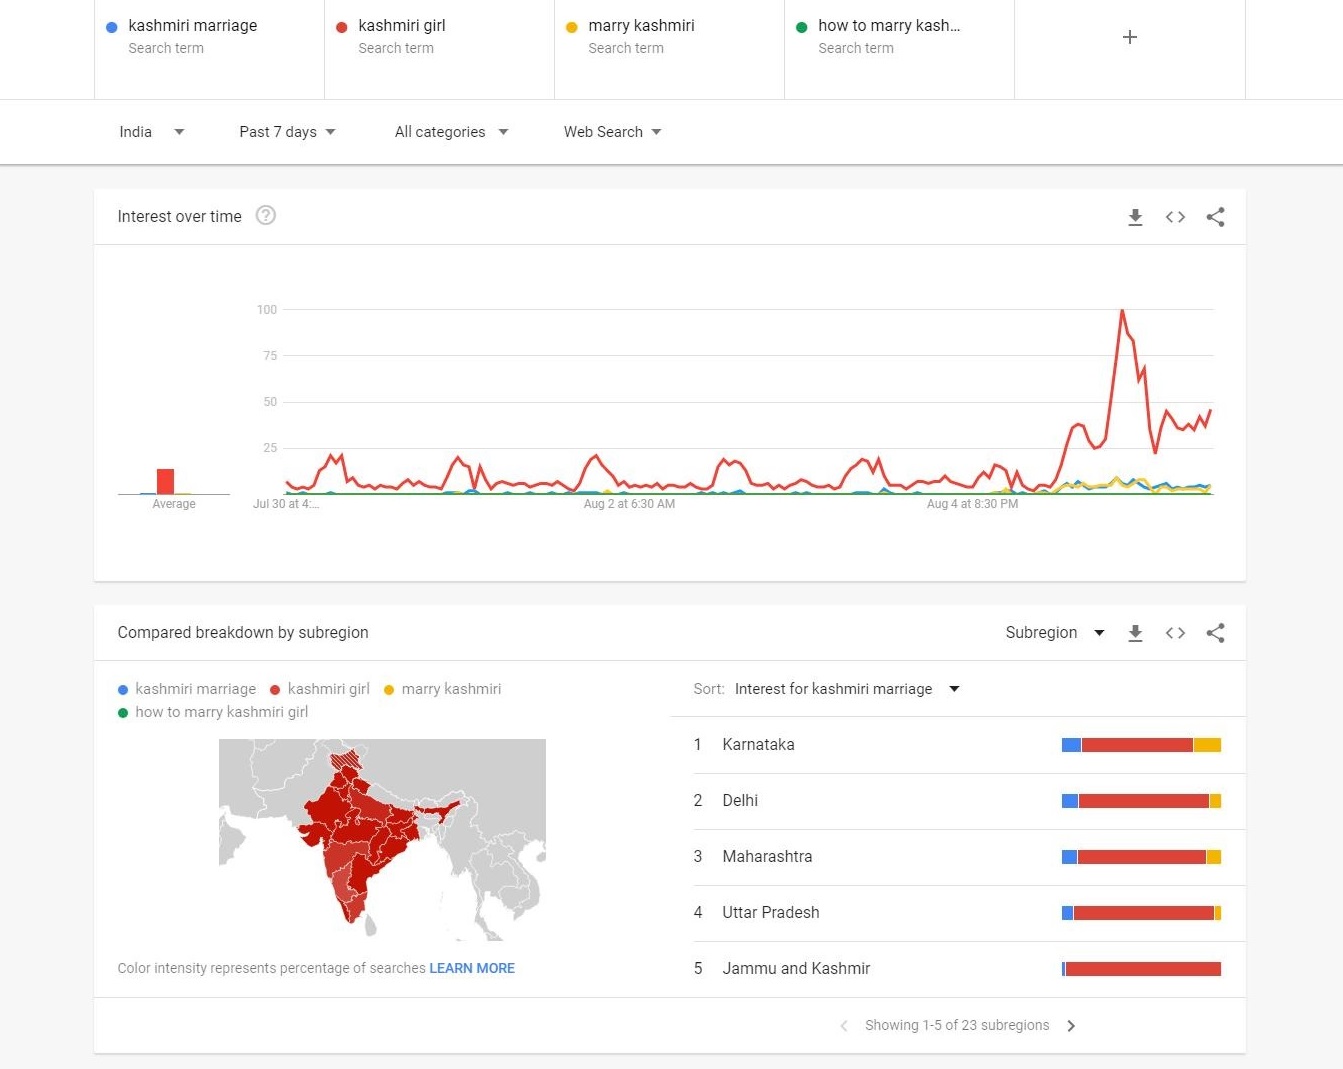 Google Trends data shows searches in India for “Kashmiri girl” surged on Aug. 5, when the India revoked Article 370.